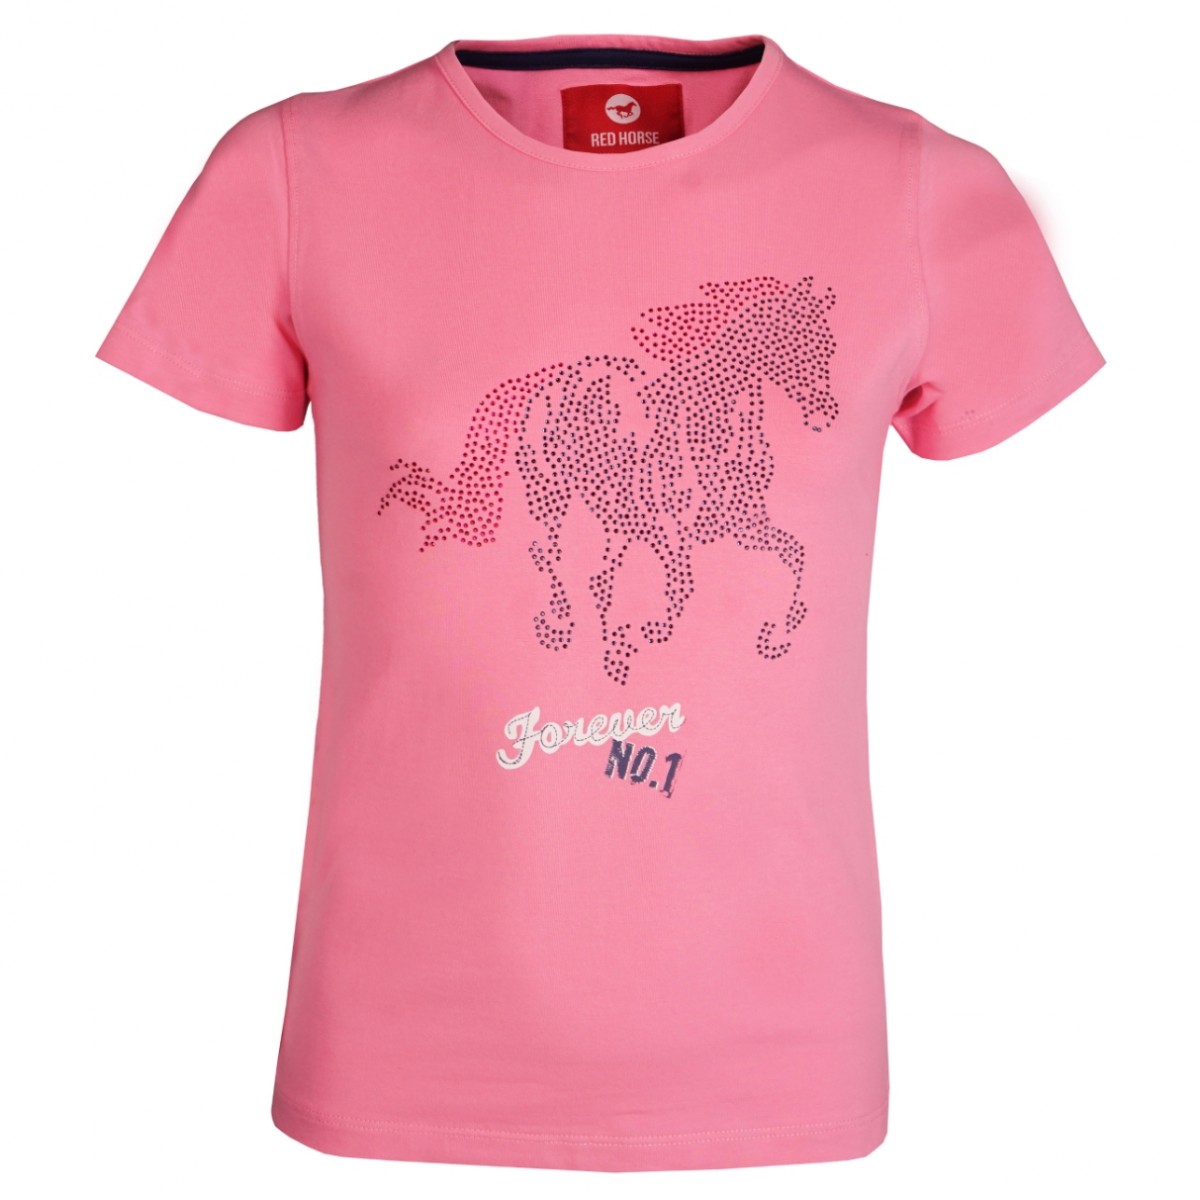 Red Horse T-Shirt With Print